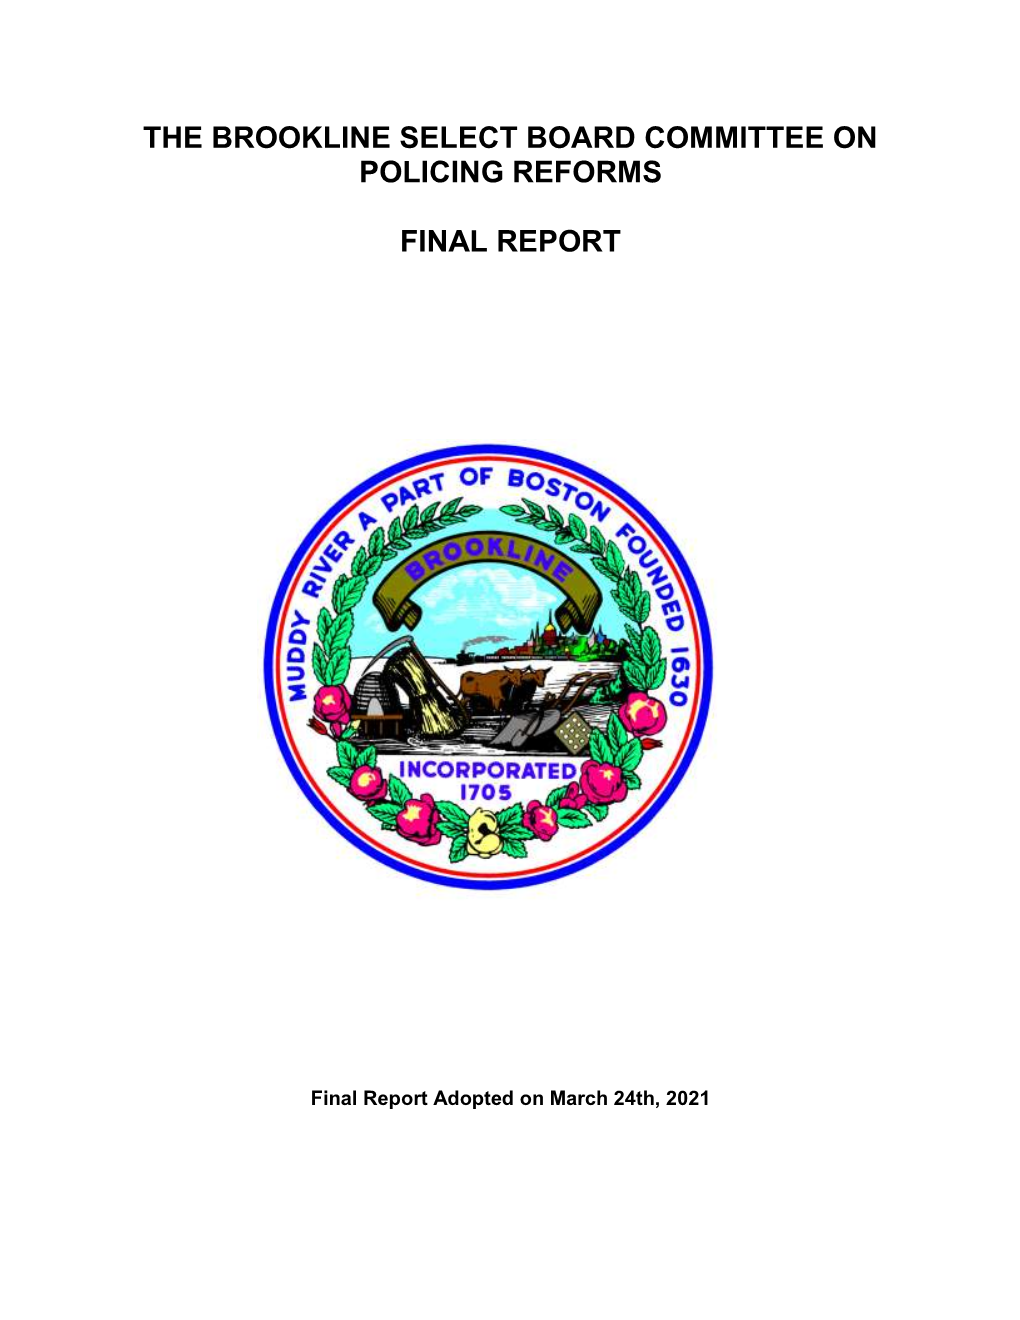 Final Report of the Committee on Policing Reforms